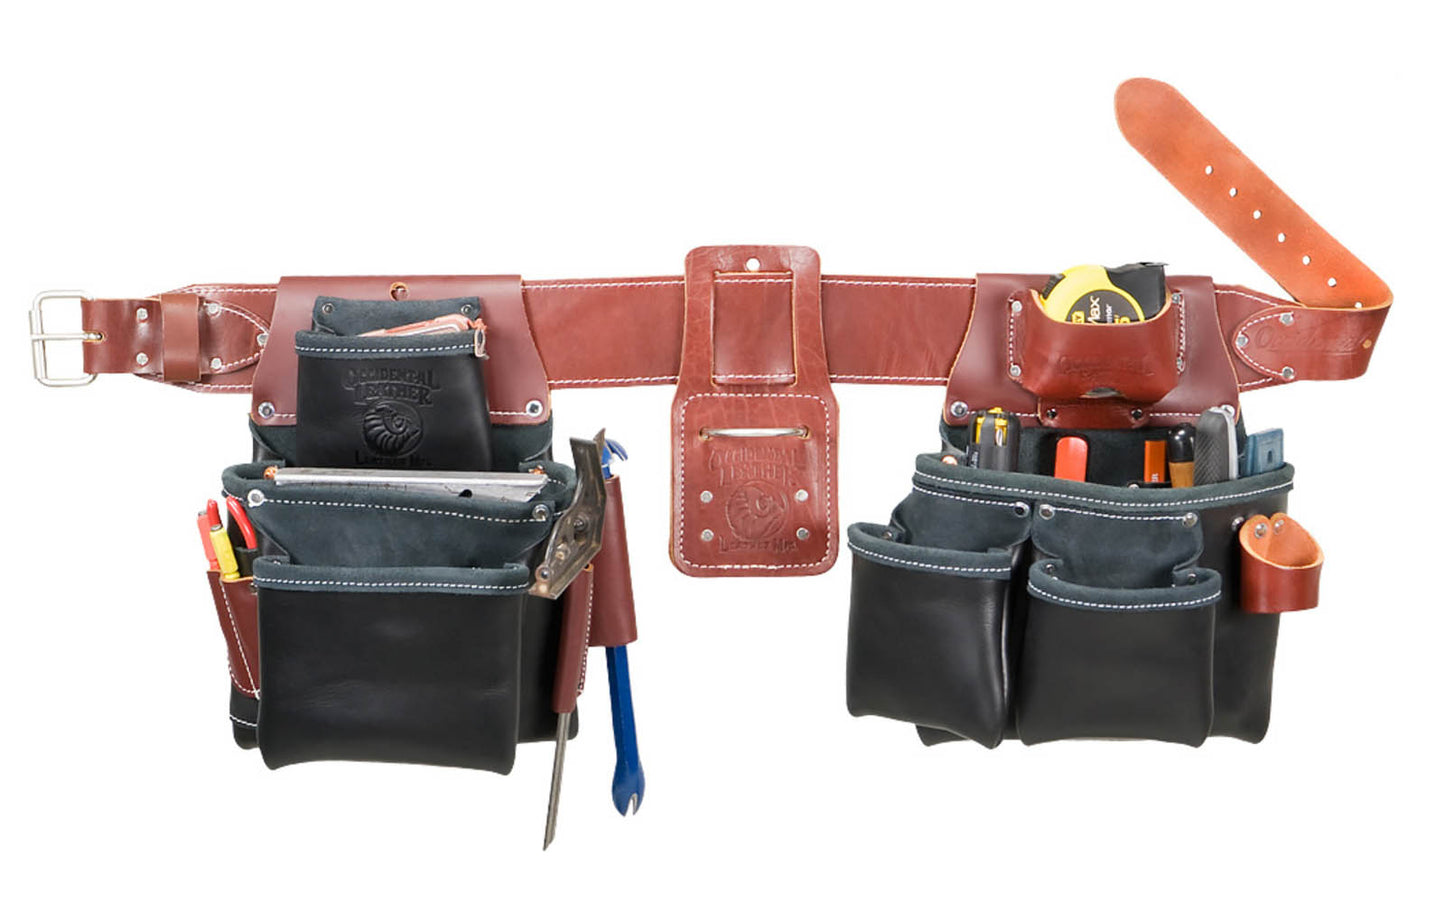 Occidental Leather "Pro Framer" Tool Belt Set Package with Double Outer Bags Black ~ B5080DB M - Medium Belt Size (3" Medium Ranger Work Belt) - Top-Grain Leather - Copper Rivets Reinforce Main Bags - 22 pockets - 759244222807. Pro Leather series made of premium top grain cow hides tanned with oils & waxes for heavy use